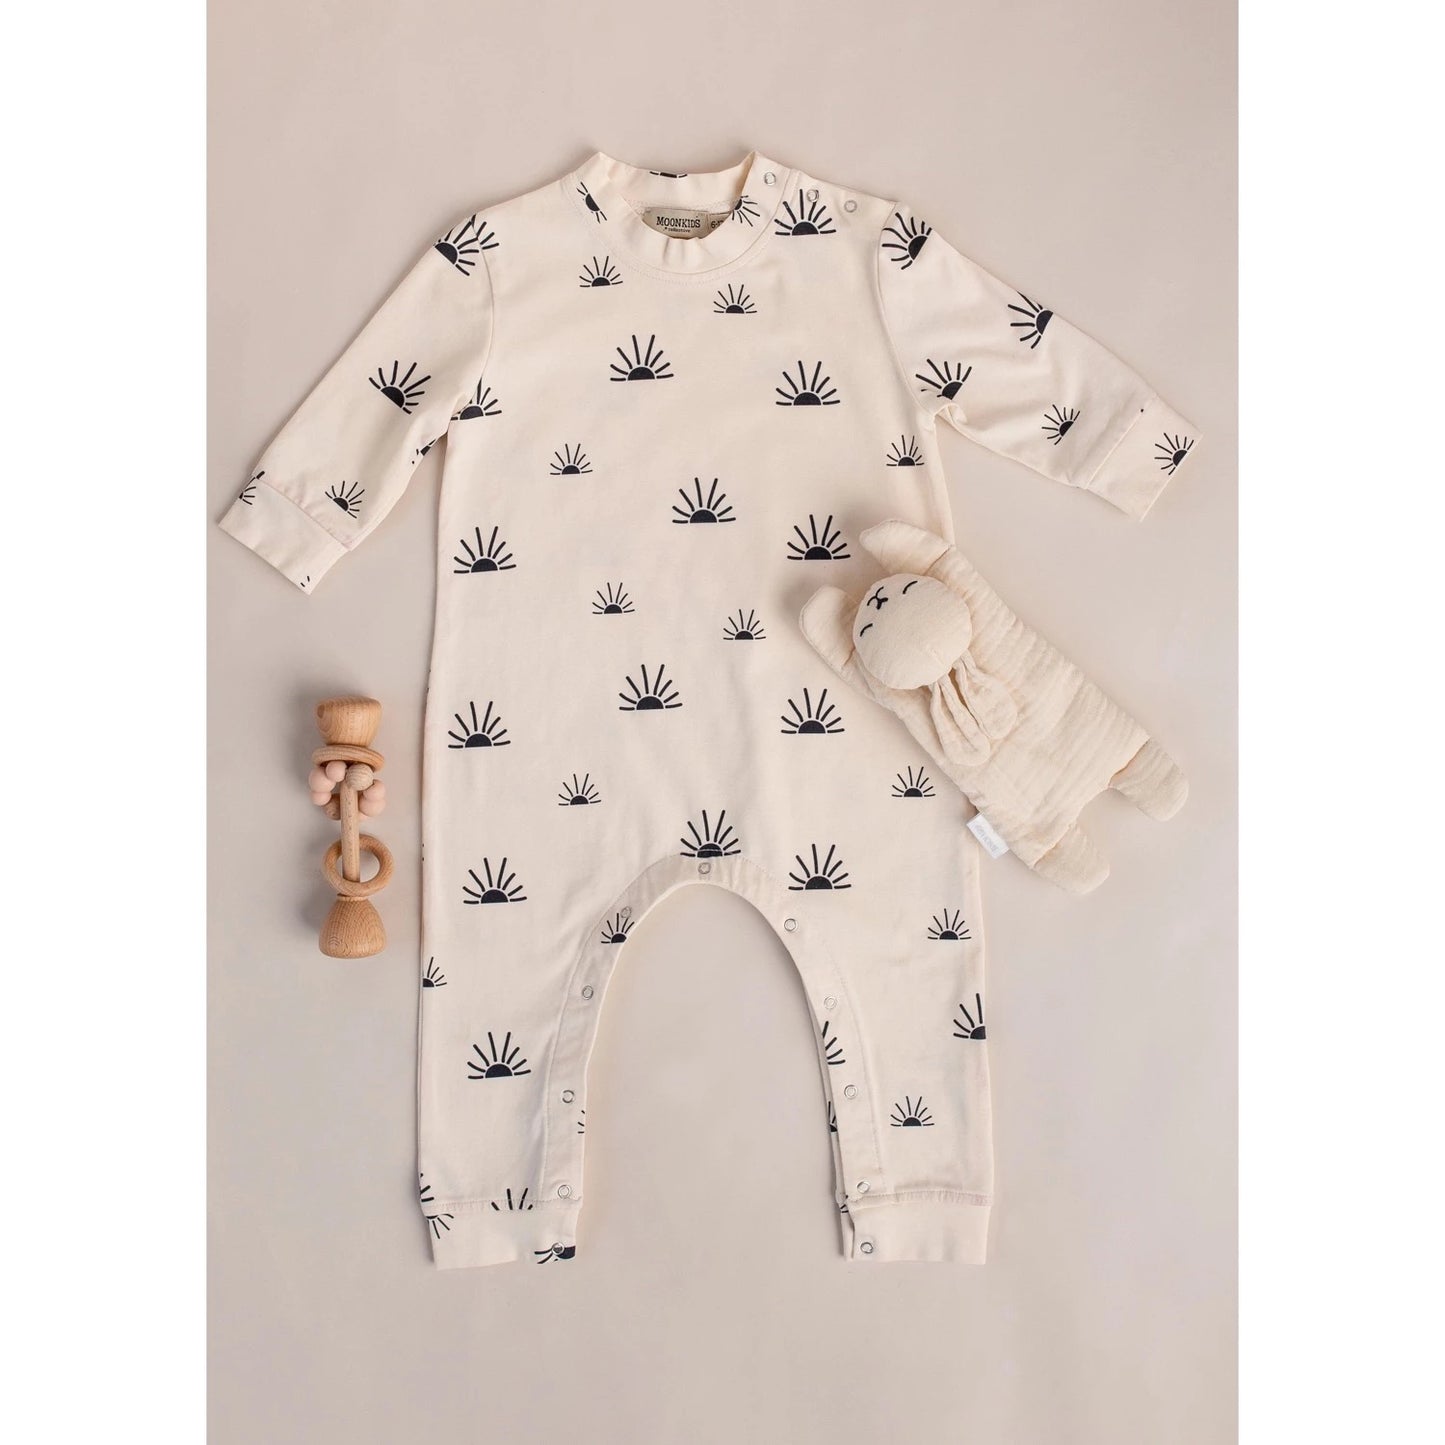 Moonkids Collective Romper - Sunrise